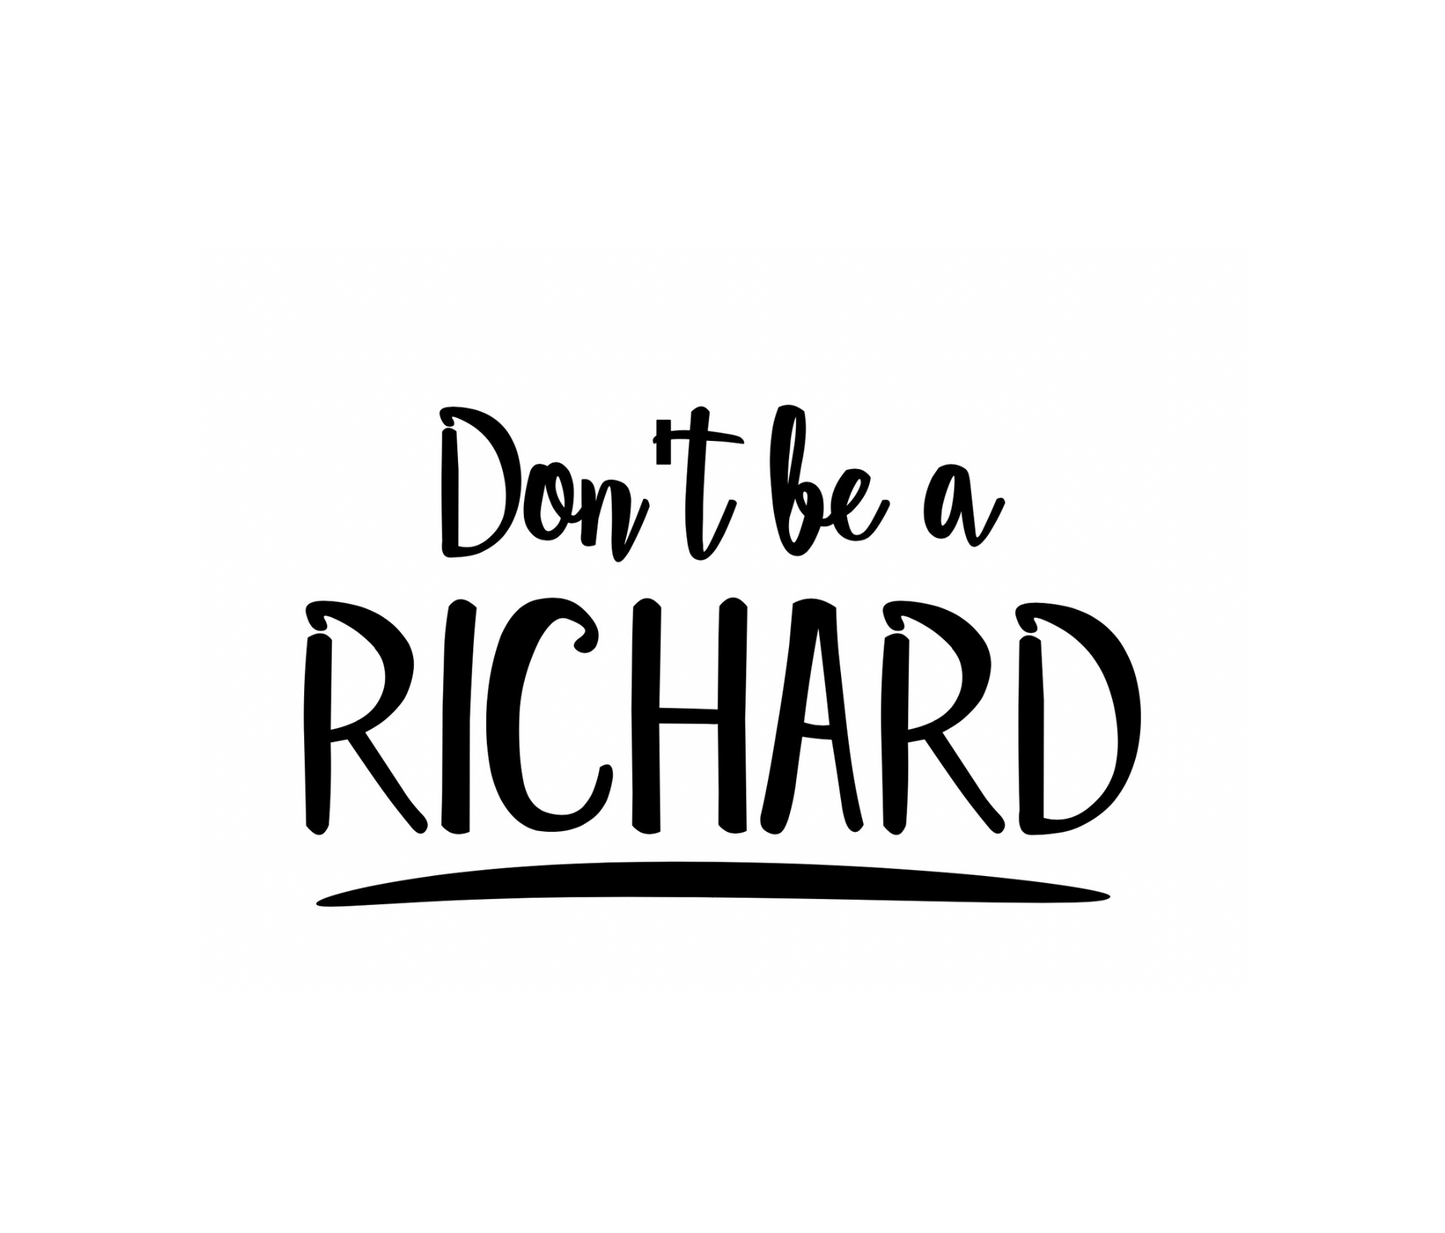 DON’T BE A RICHARD  DESIGN! YOU CHOOSE COLOR AND STYLE! TEE OR CREWNECK! BLEACHED OR NON-BLEACHED